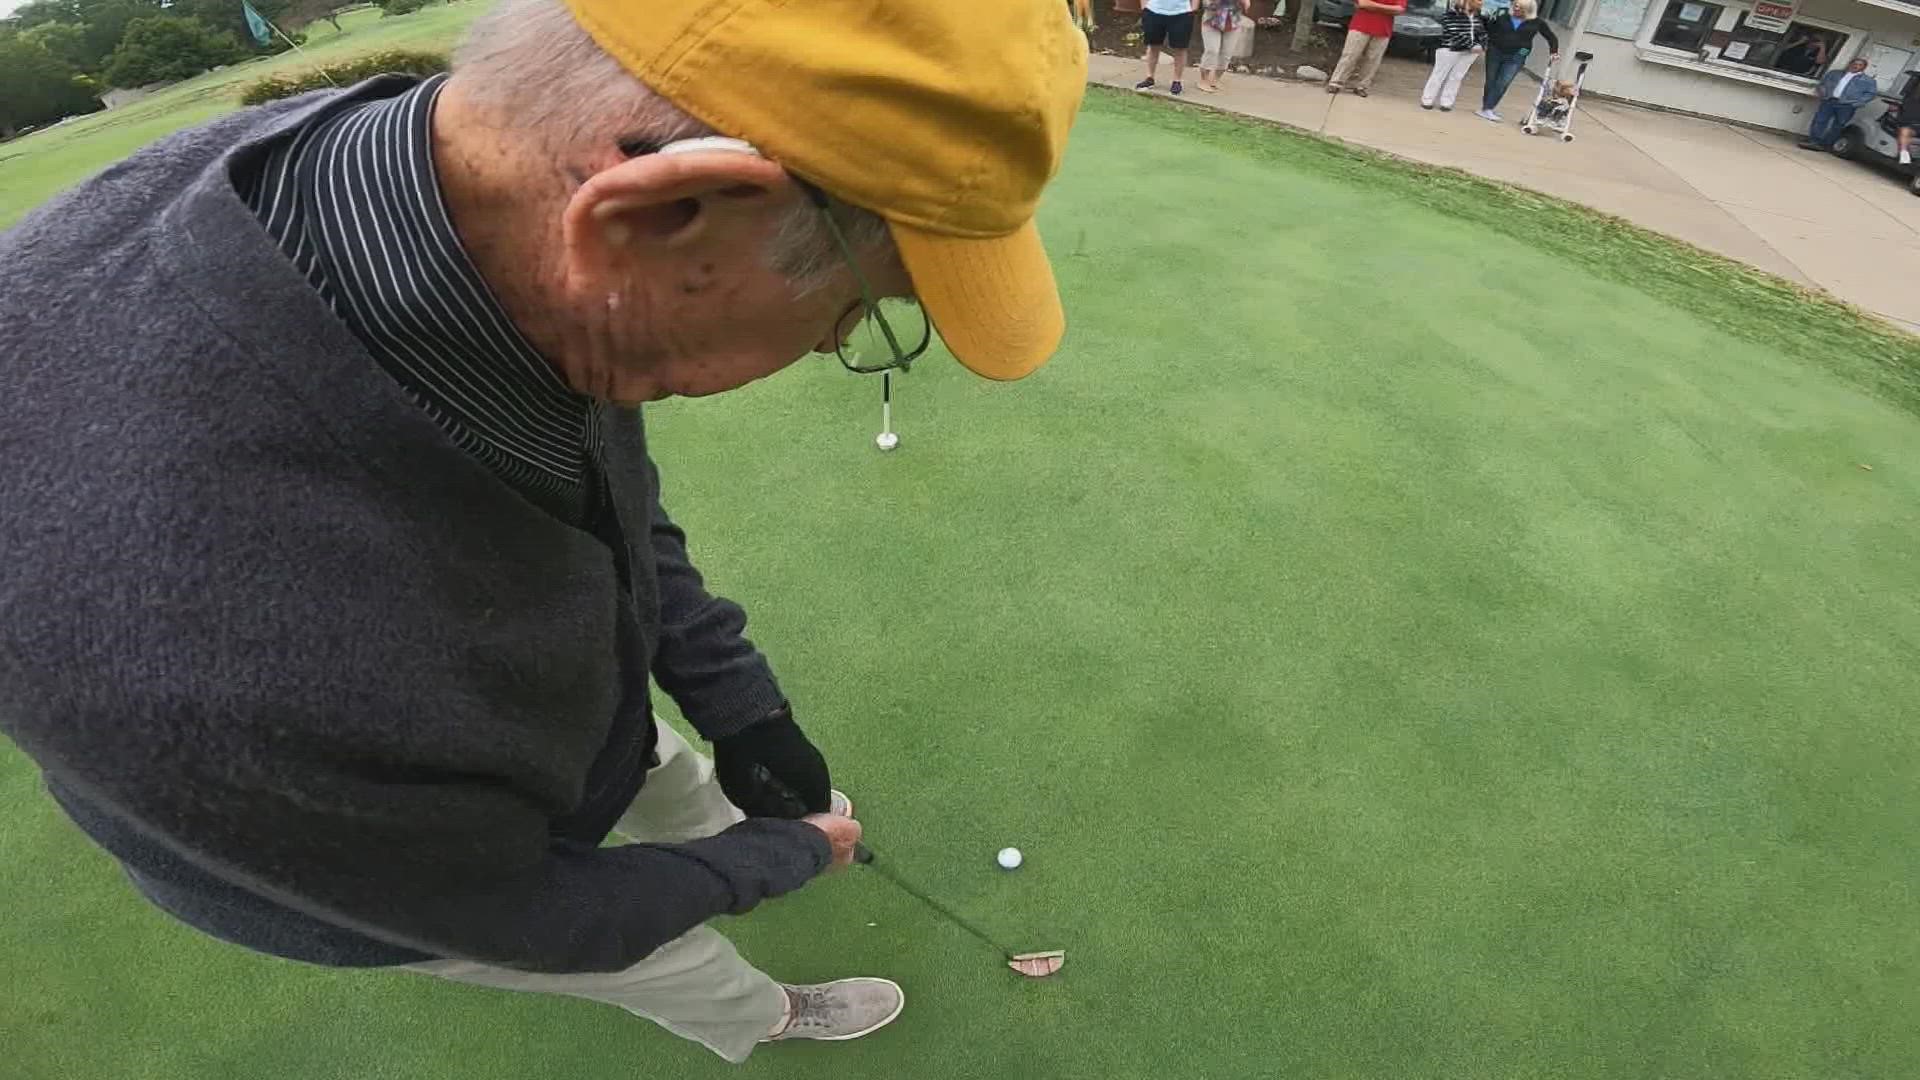 Tony Gibbons served in World War II. His first chance to play golf was in the service. Now, he takes it easy, but at 102 he is still active on the golf course.